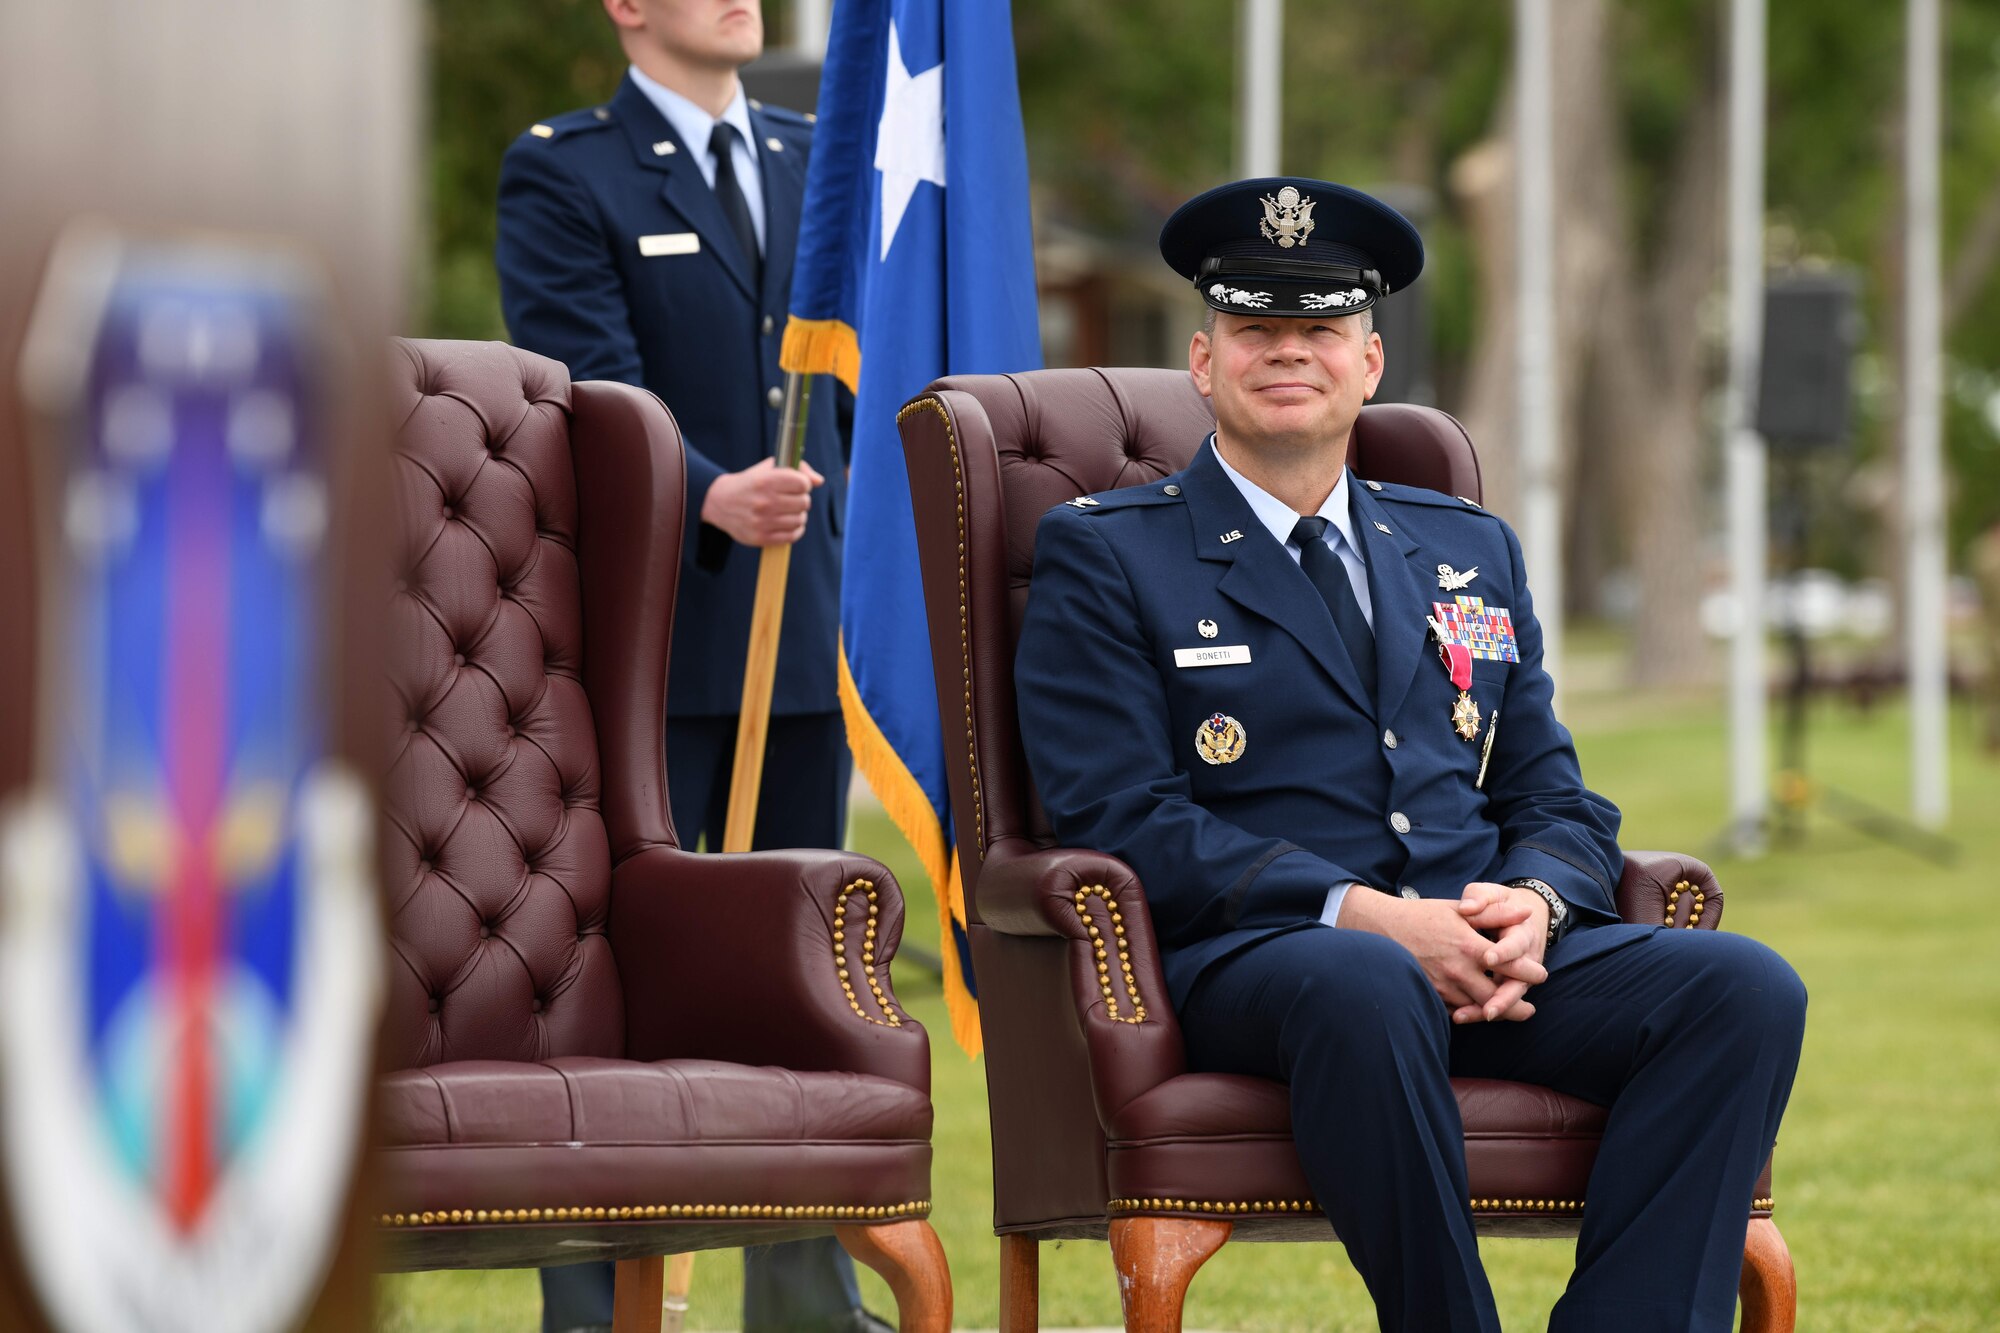 The ceremony signified the transition of command from Col. Peter Bonetti to Col. Catherine Barrington. (U.S. Air Force photo by Airman 1st Class Anthony Munoz)